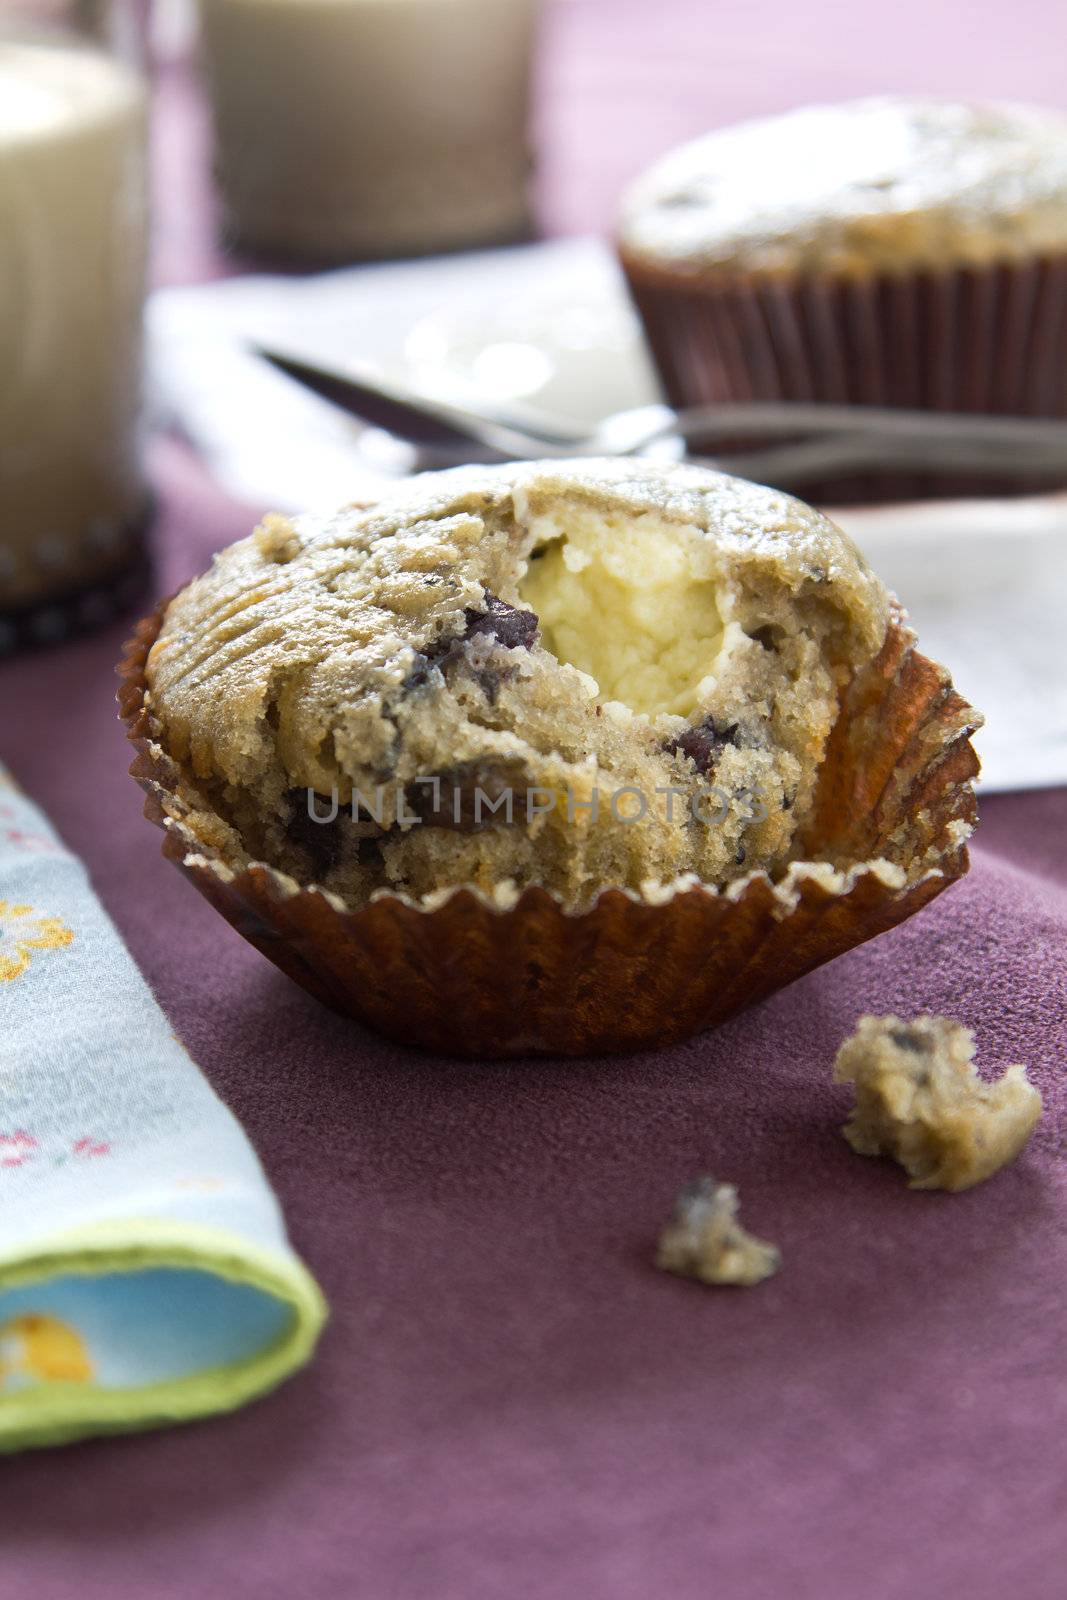 Blueberry with cream cheese muffin